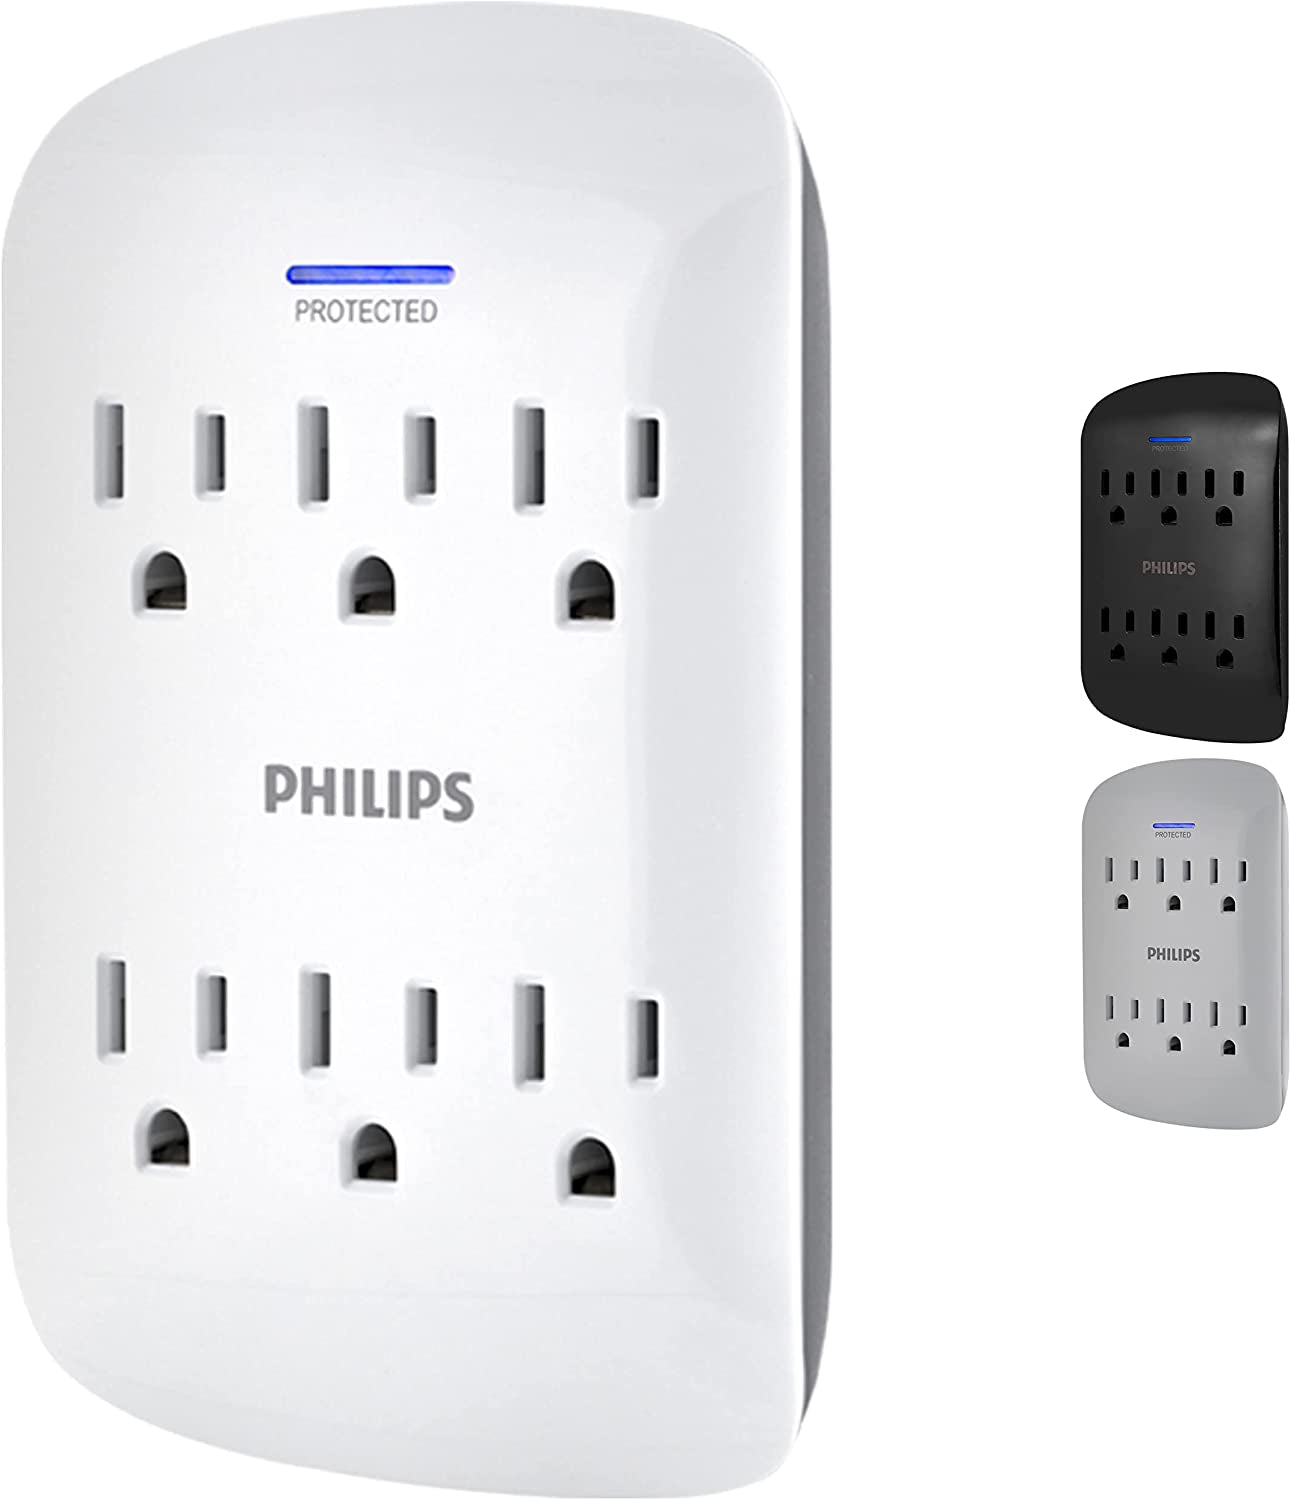 Philips 6-Outlet Extender Surge Protector, 900 Joules, 3-Prong, Space Saving Design, Protection Indicator LED Light